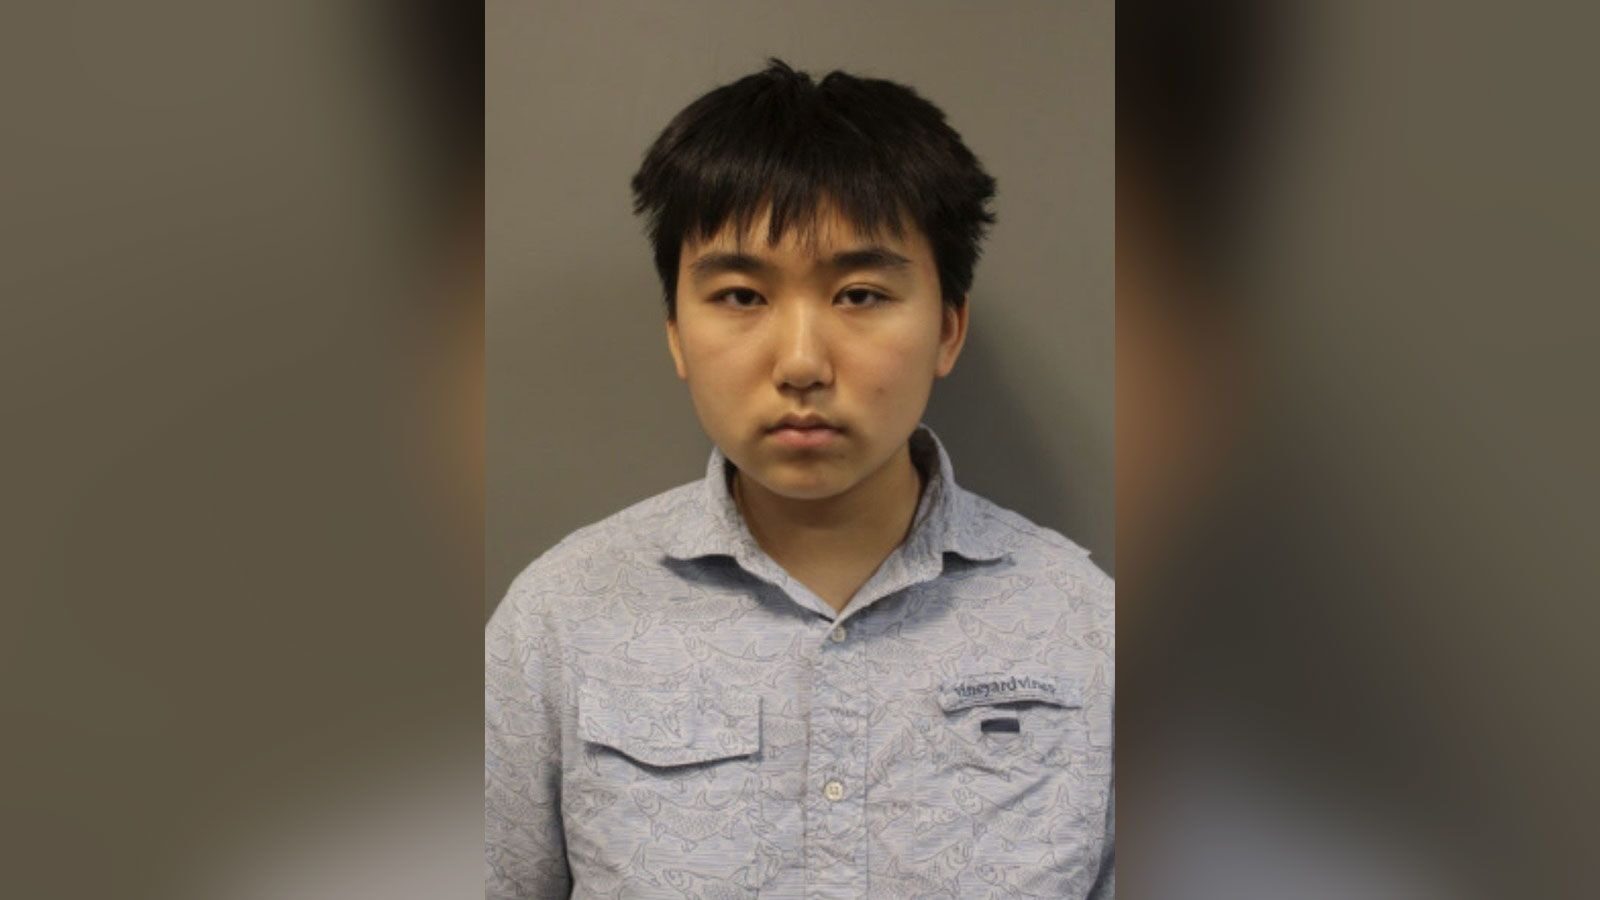 Alex Ye, an 18-year-old Maryland high school student, was arrested and charged with threat of mass ...